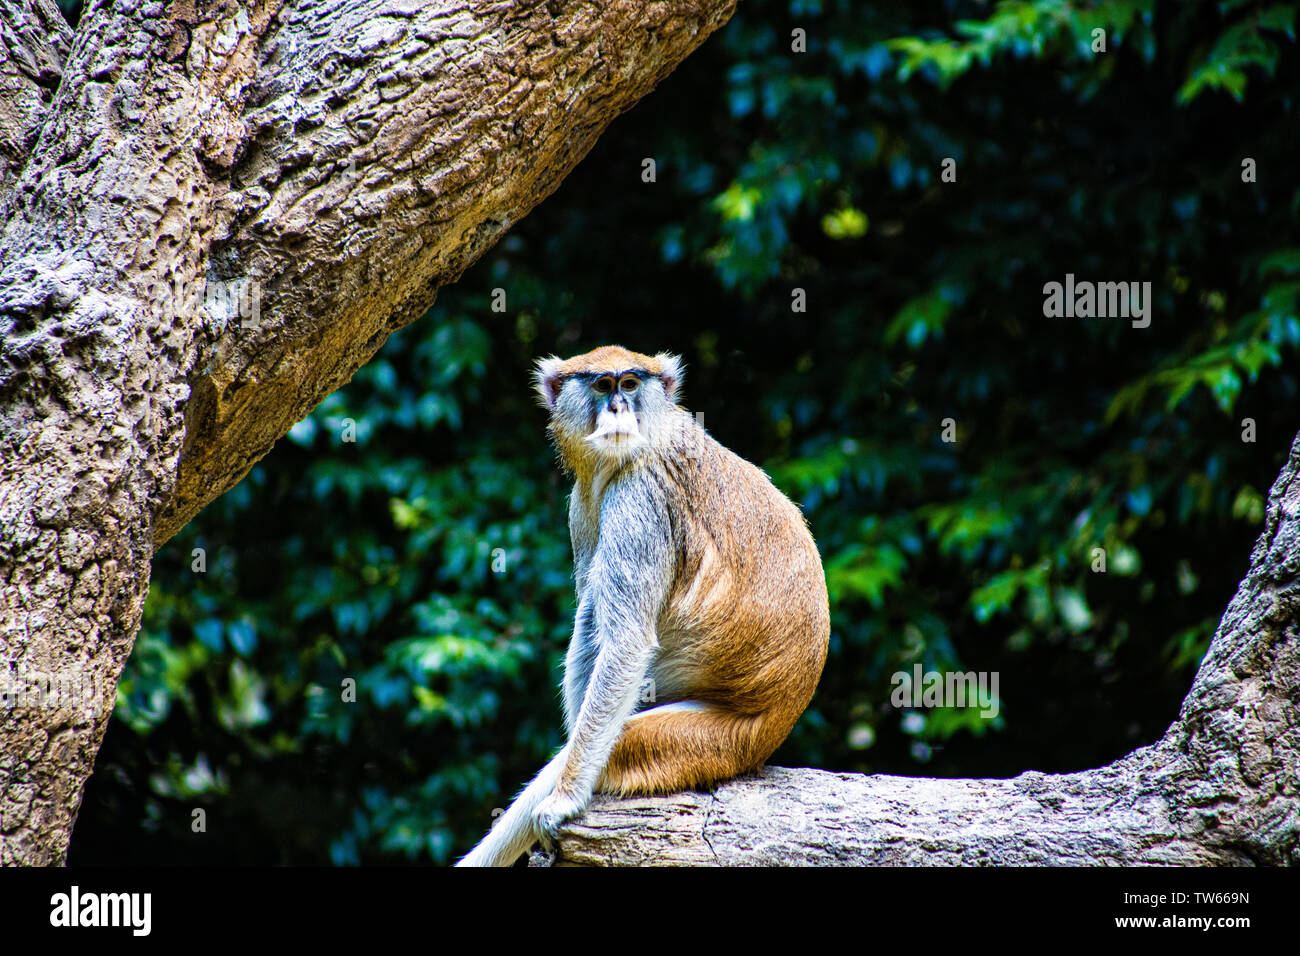 A Monkey taking in his surroundings at the Houston Zoo. Stock Photo